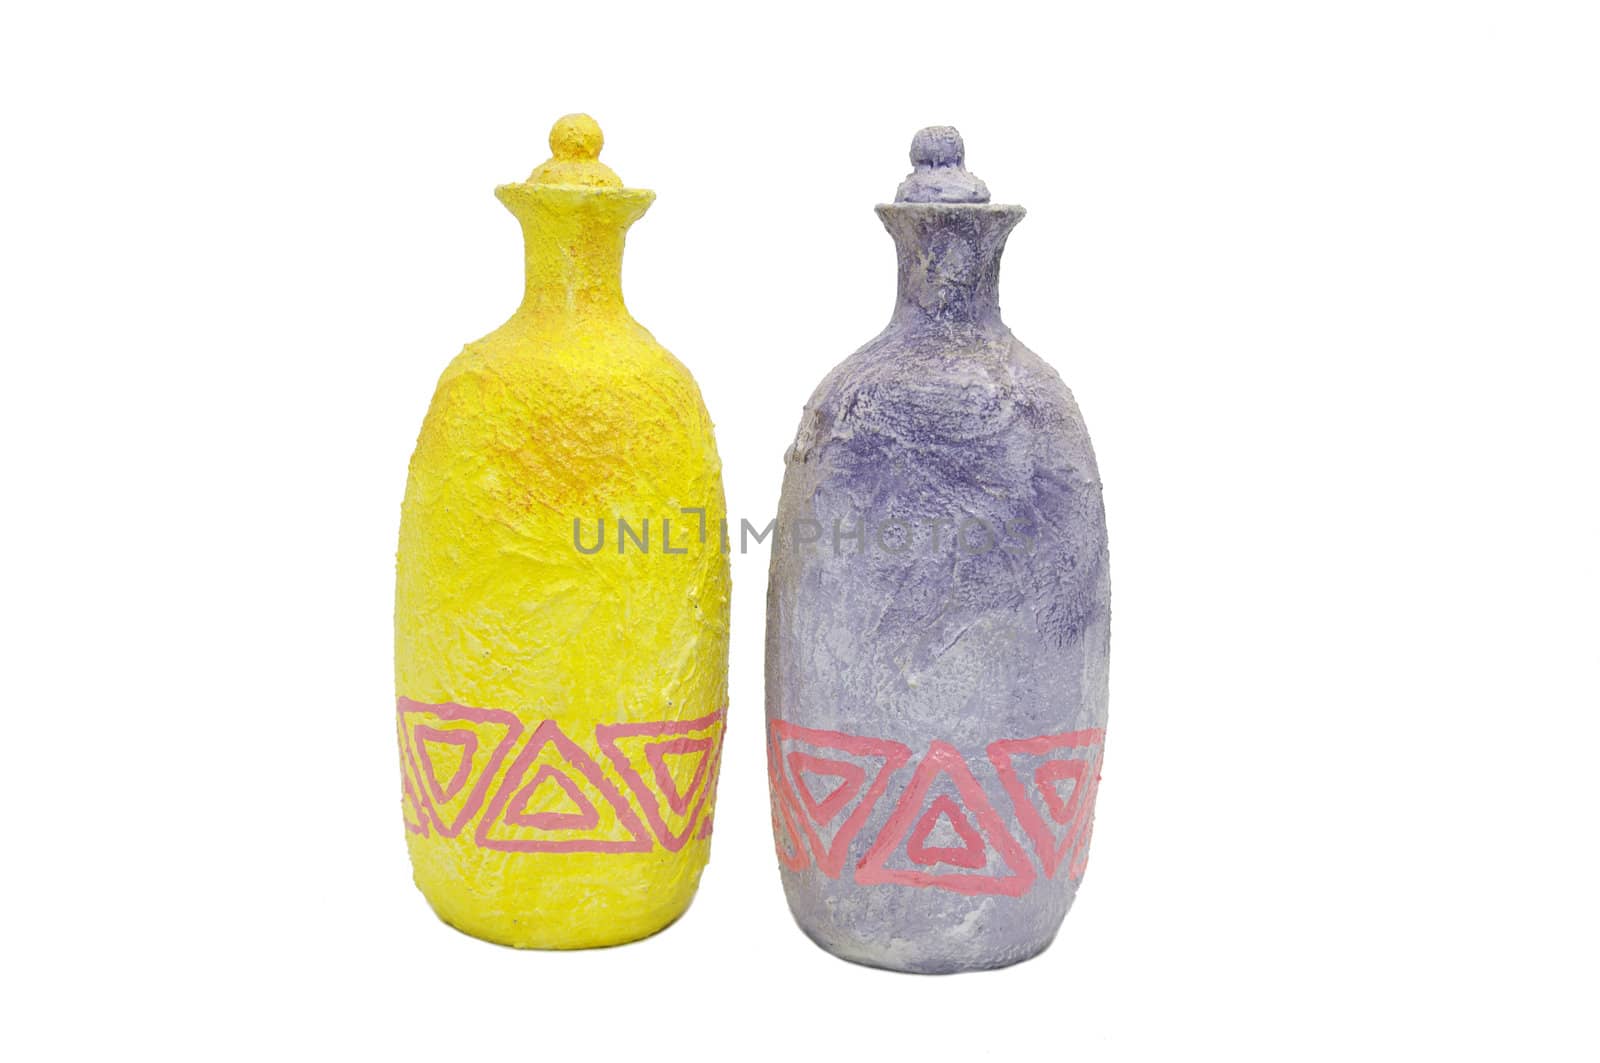 clay bottles by Lester120